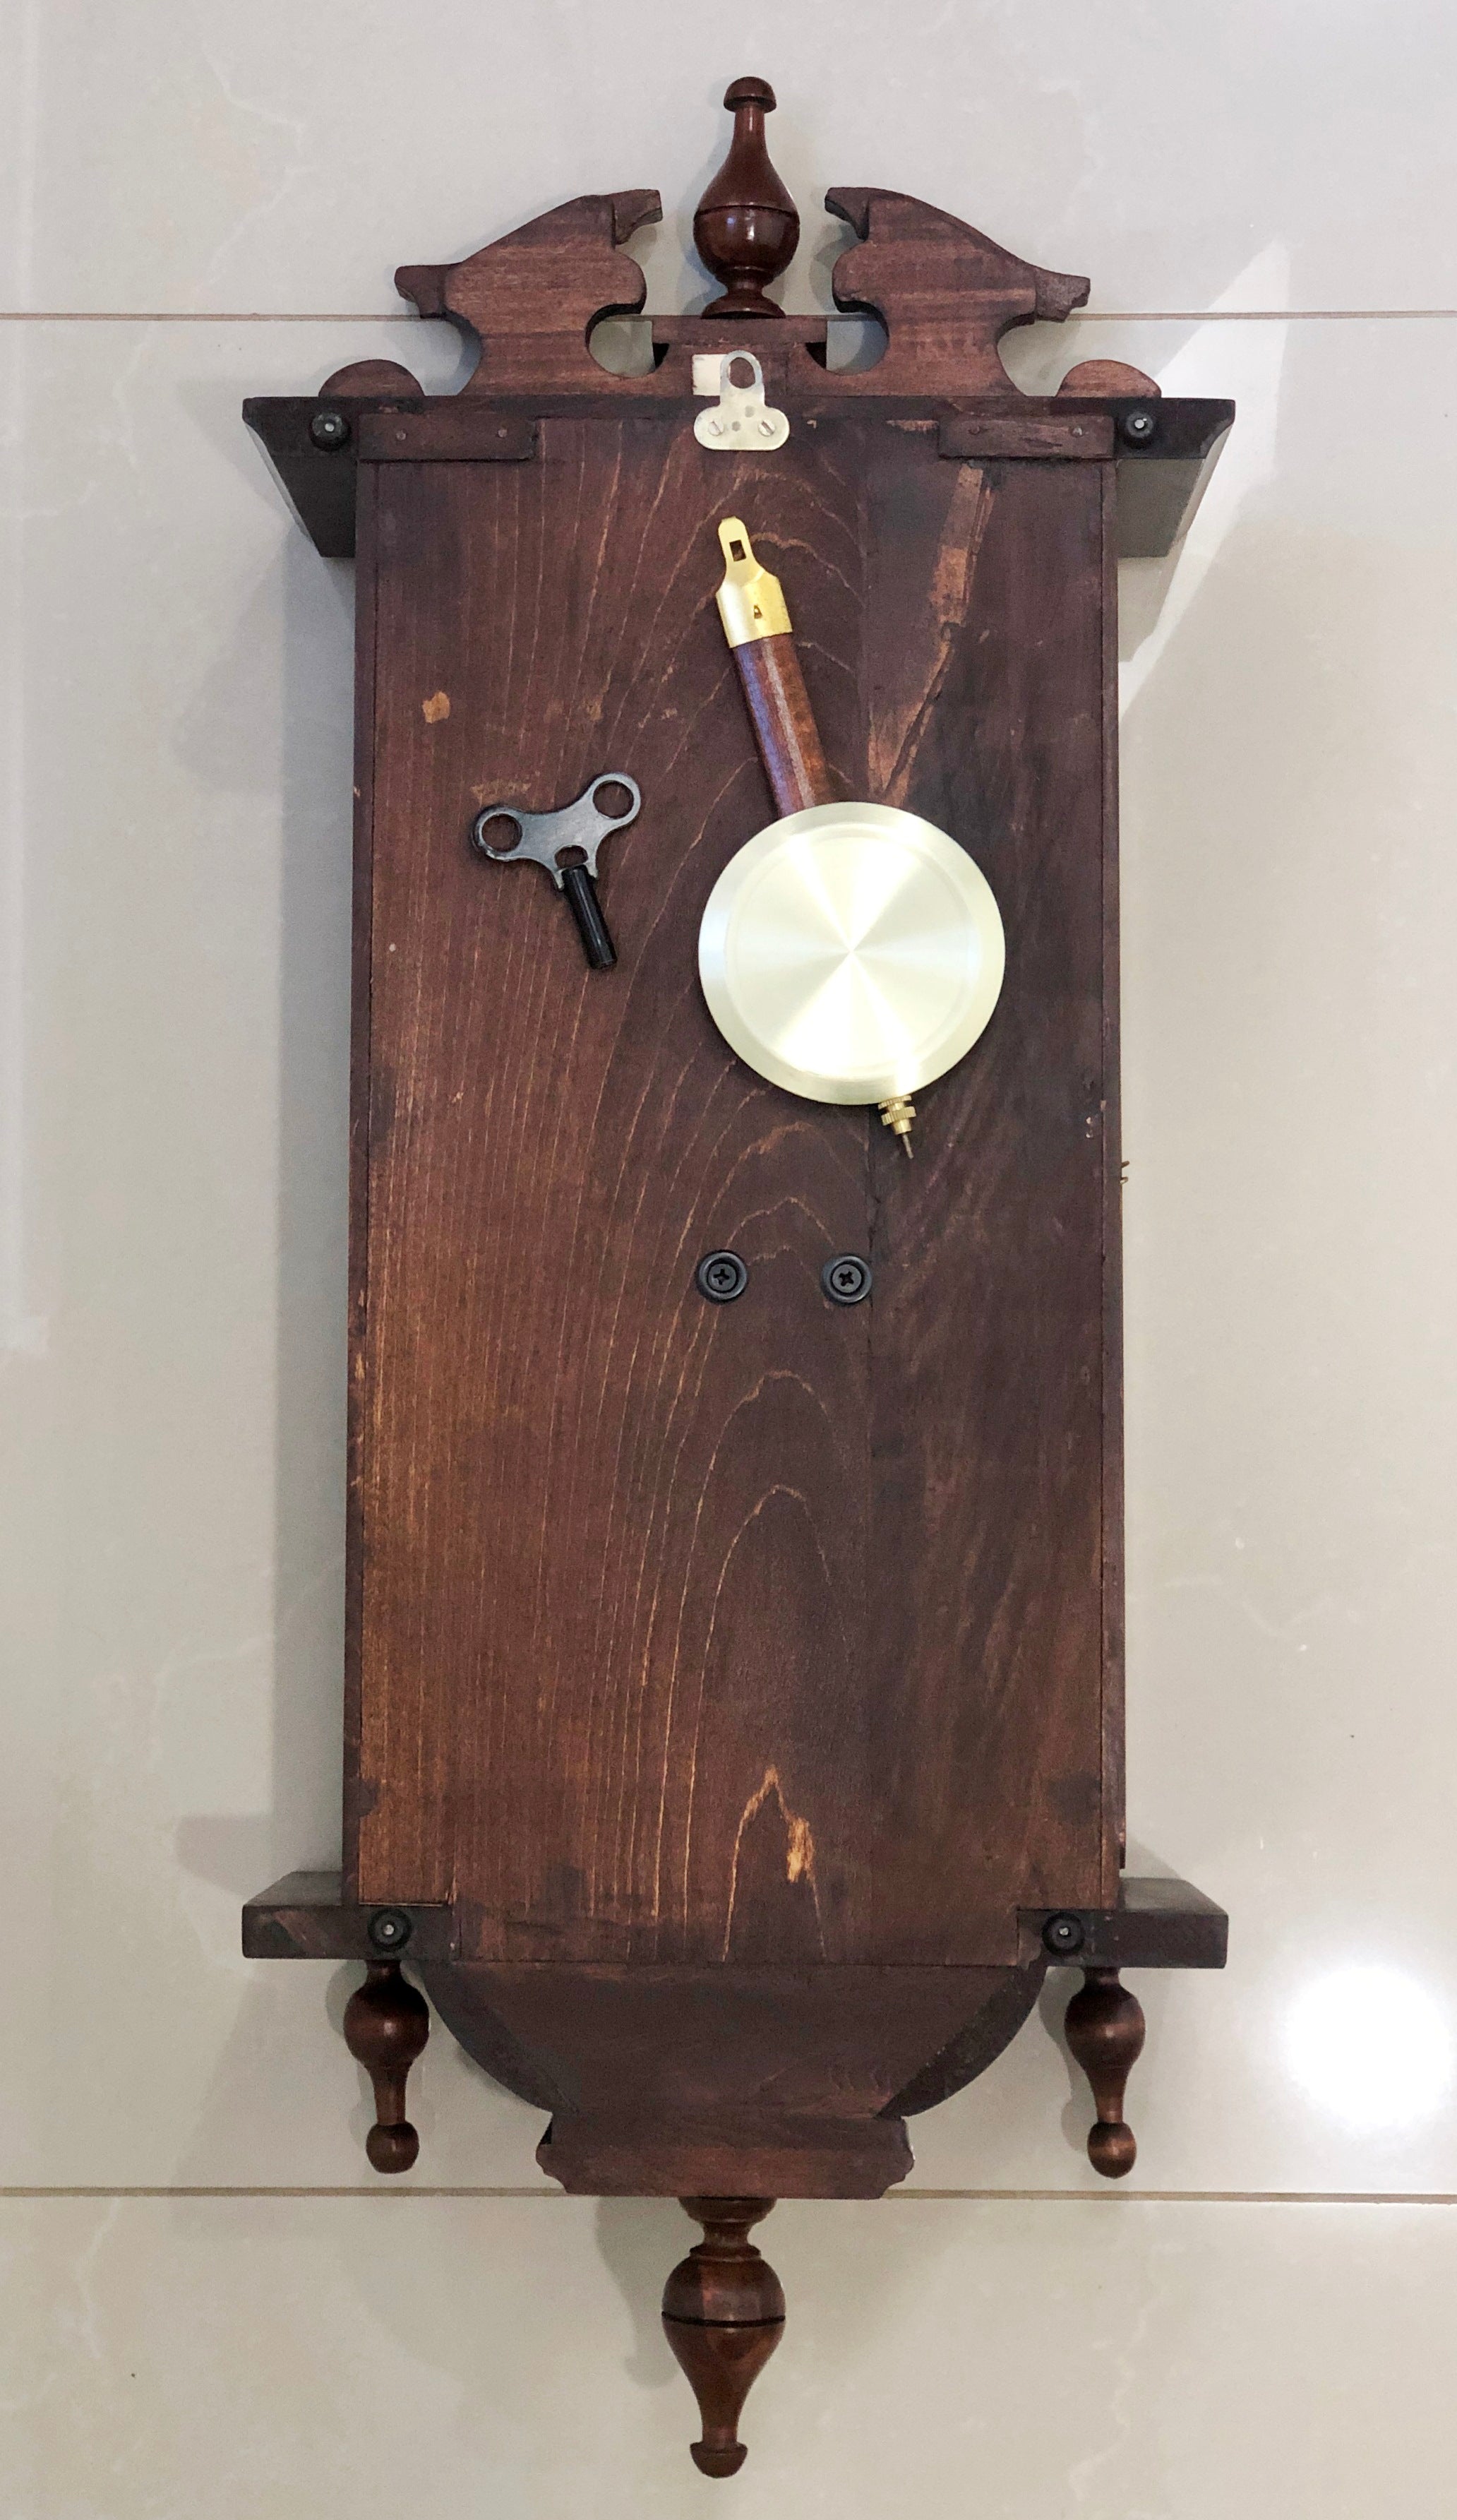 Vintage 31 Day NATIONWIDE Pendulum Chime Wal Clock | eXibit collection